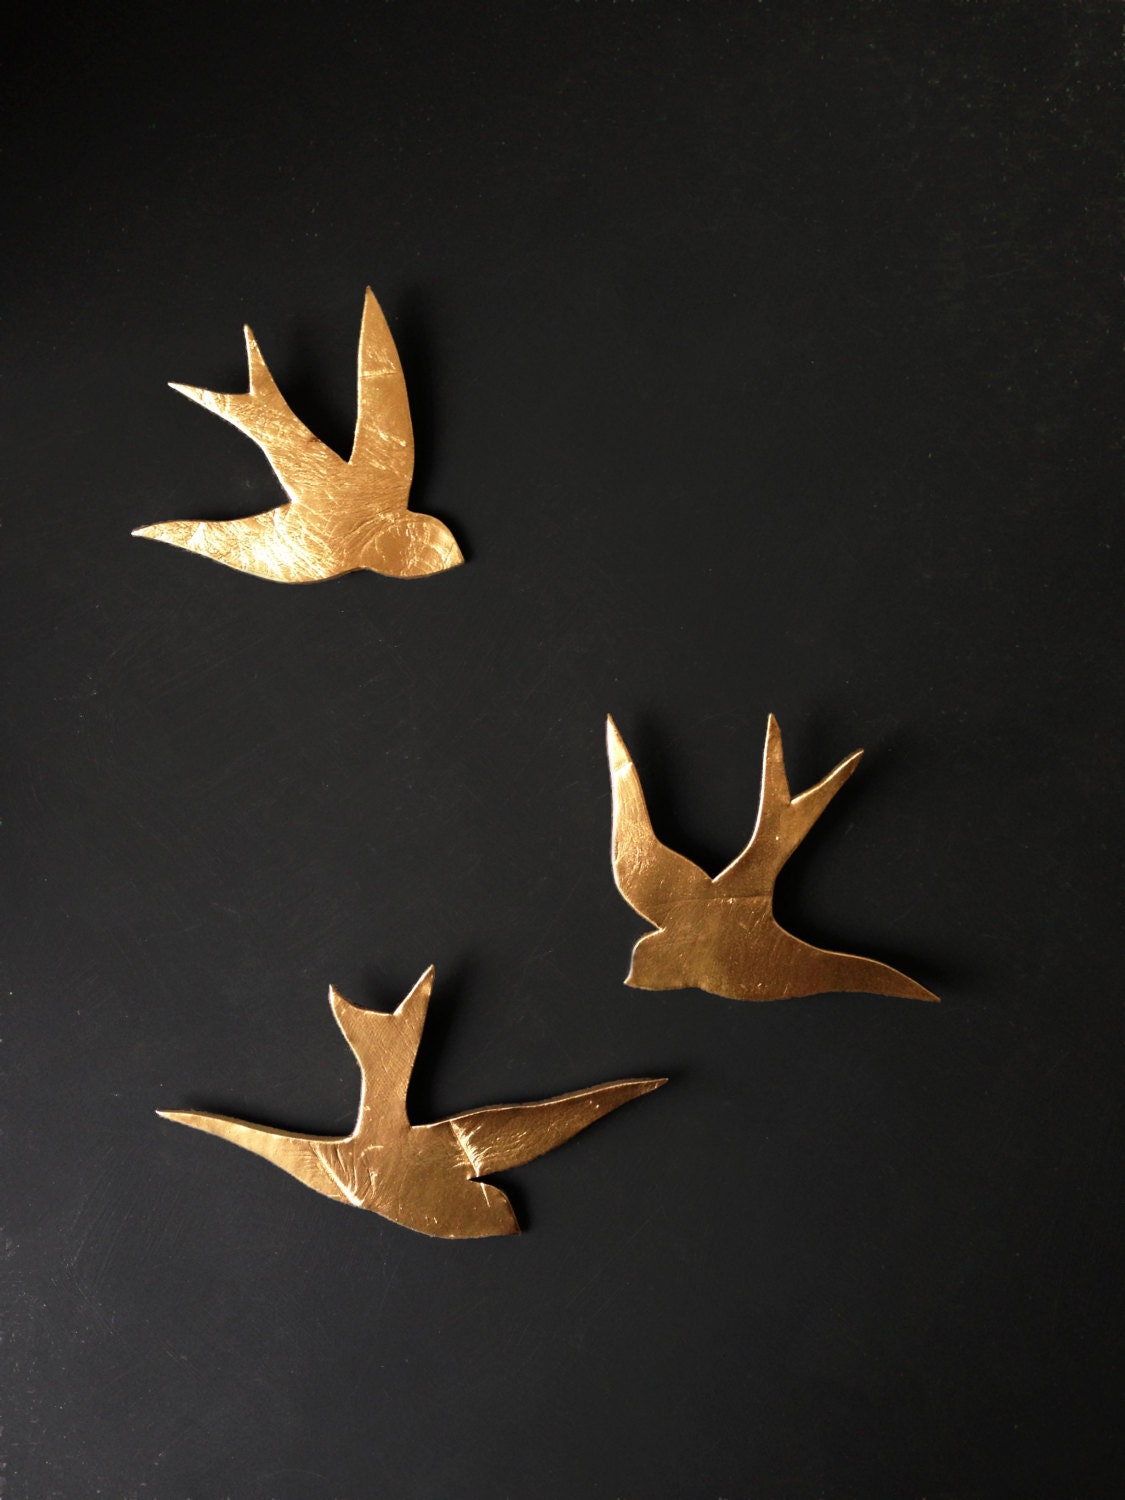 We fly together Gold porcelain wall art swallows Modern ceramic gold bird wall sculpture Bathroom kitchen bedroom home art Wall hanging